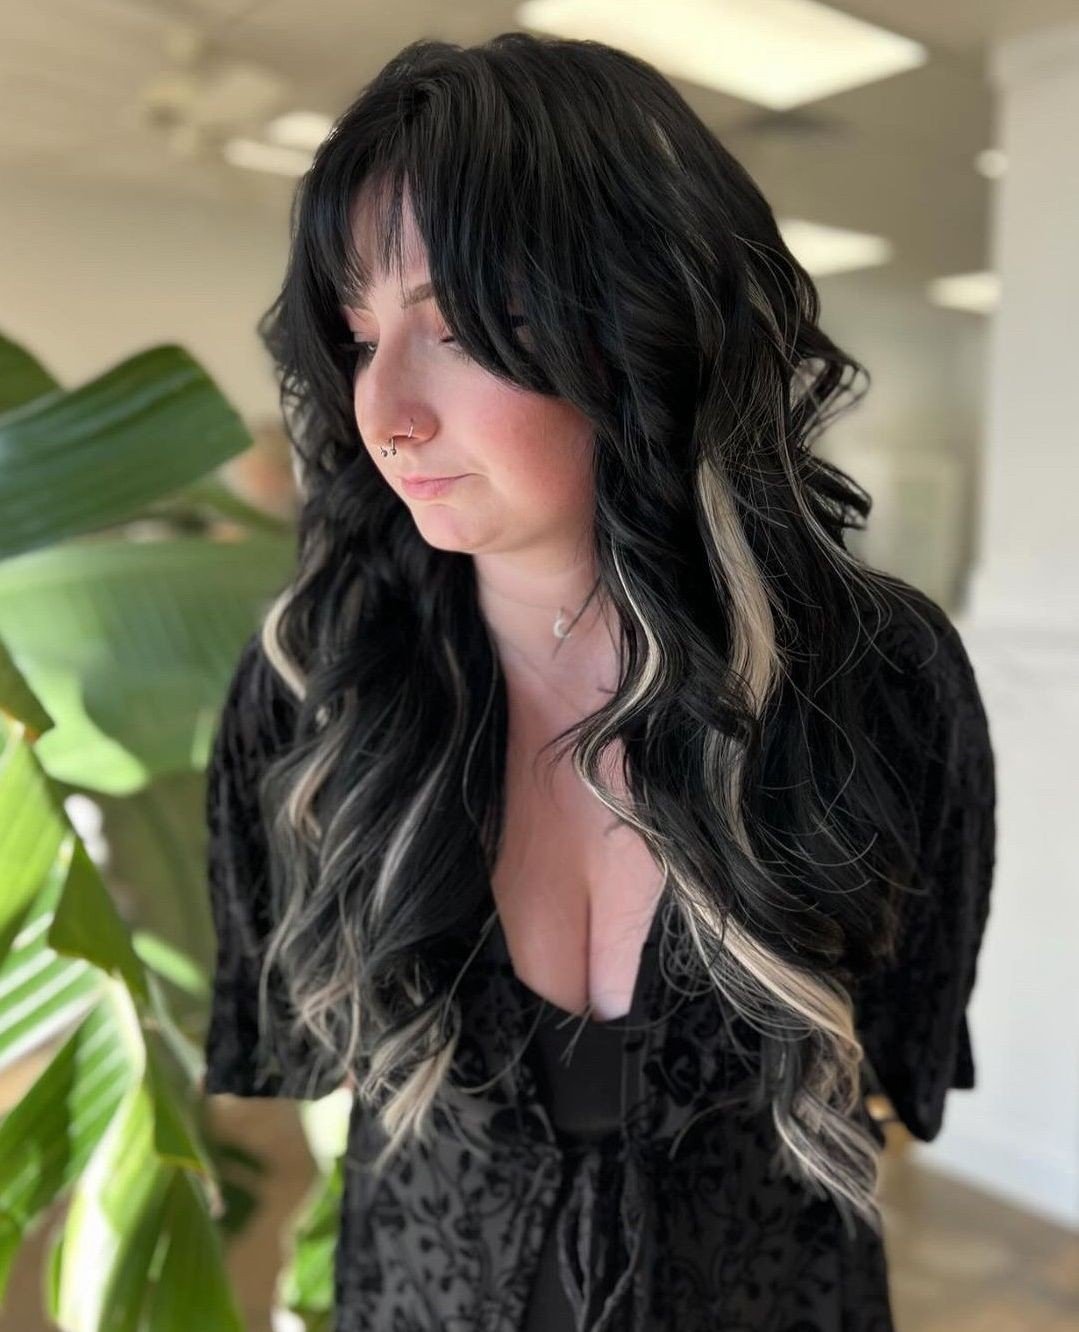 &quot;Thanks, it's hair extensions!&quot; ⁠
⁠
You heard it here first: it's THE hair for summer 🌞⁠
⁠
-easy to wear &amp; style⁠
-pop of brightness (𝘪𝘯 𝘢𝘭𝘭 𝘵𝘩𝘦 𝘳𝘪𝘨𝘩𝘵 𝘱𝘭𝘢𝘤𝘦𝘴)⁠
-little to no color/bleach damage to your natural hair⁠
